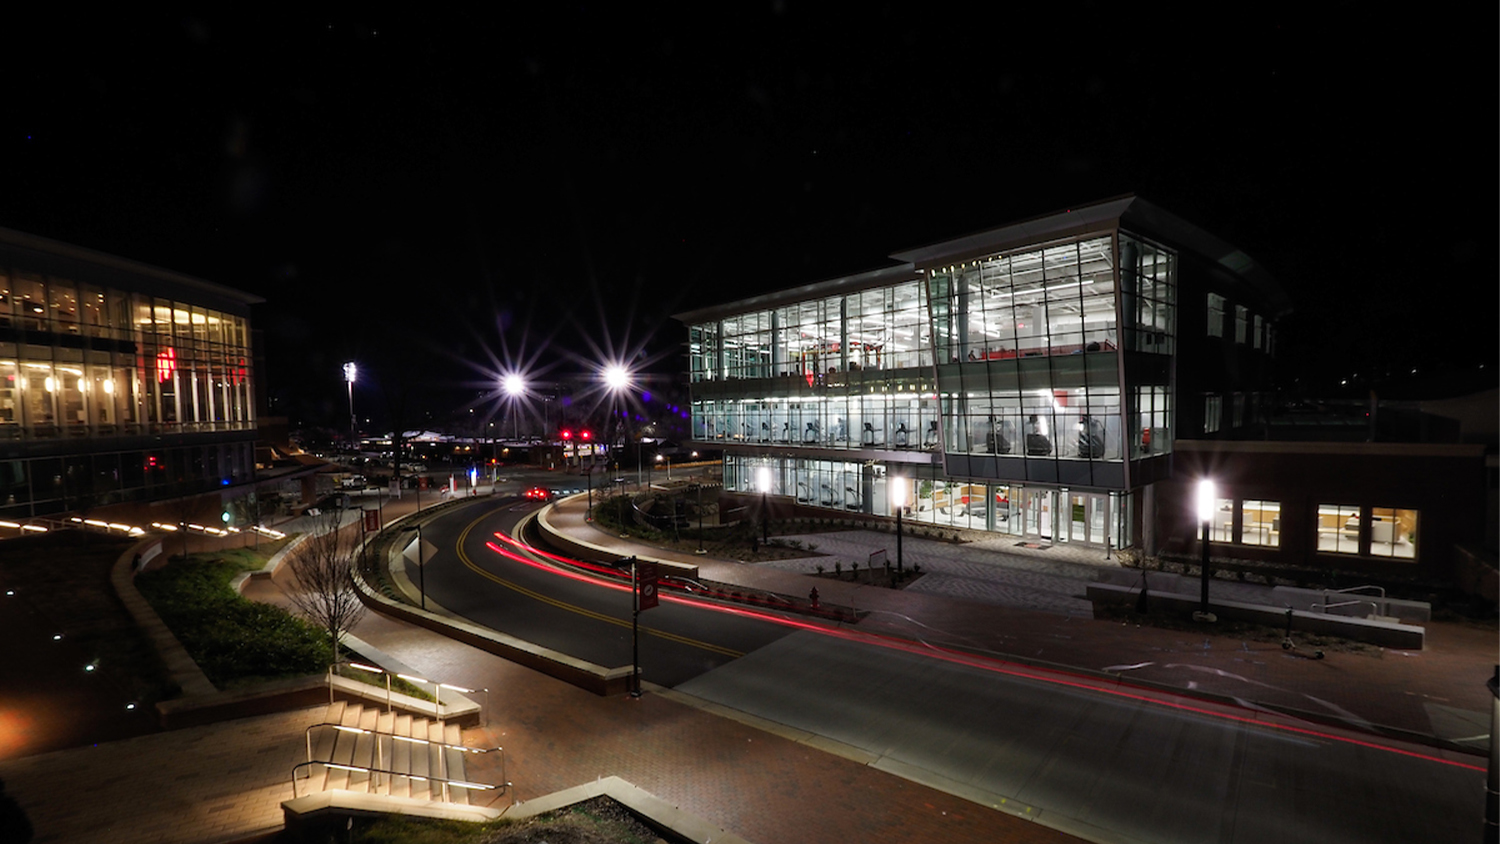 The new Wellness and Recreation Center at night